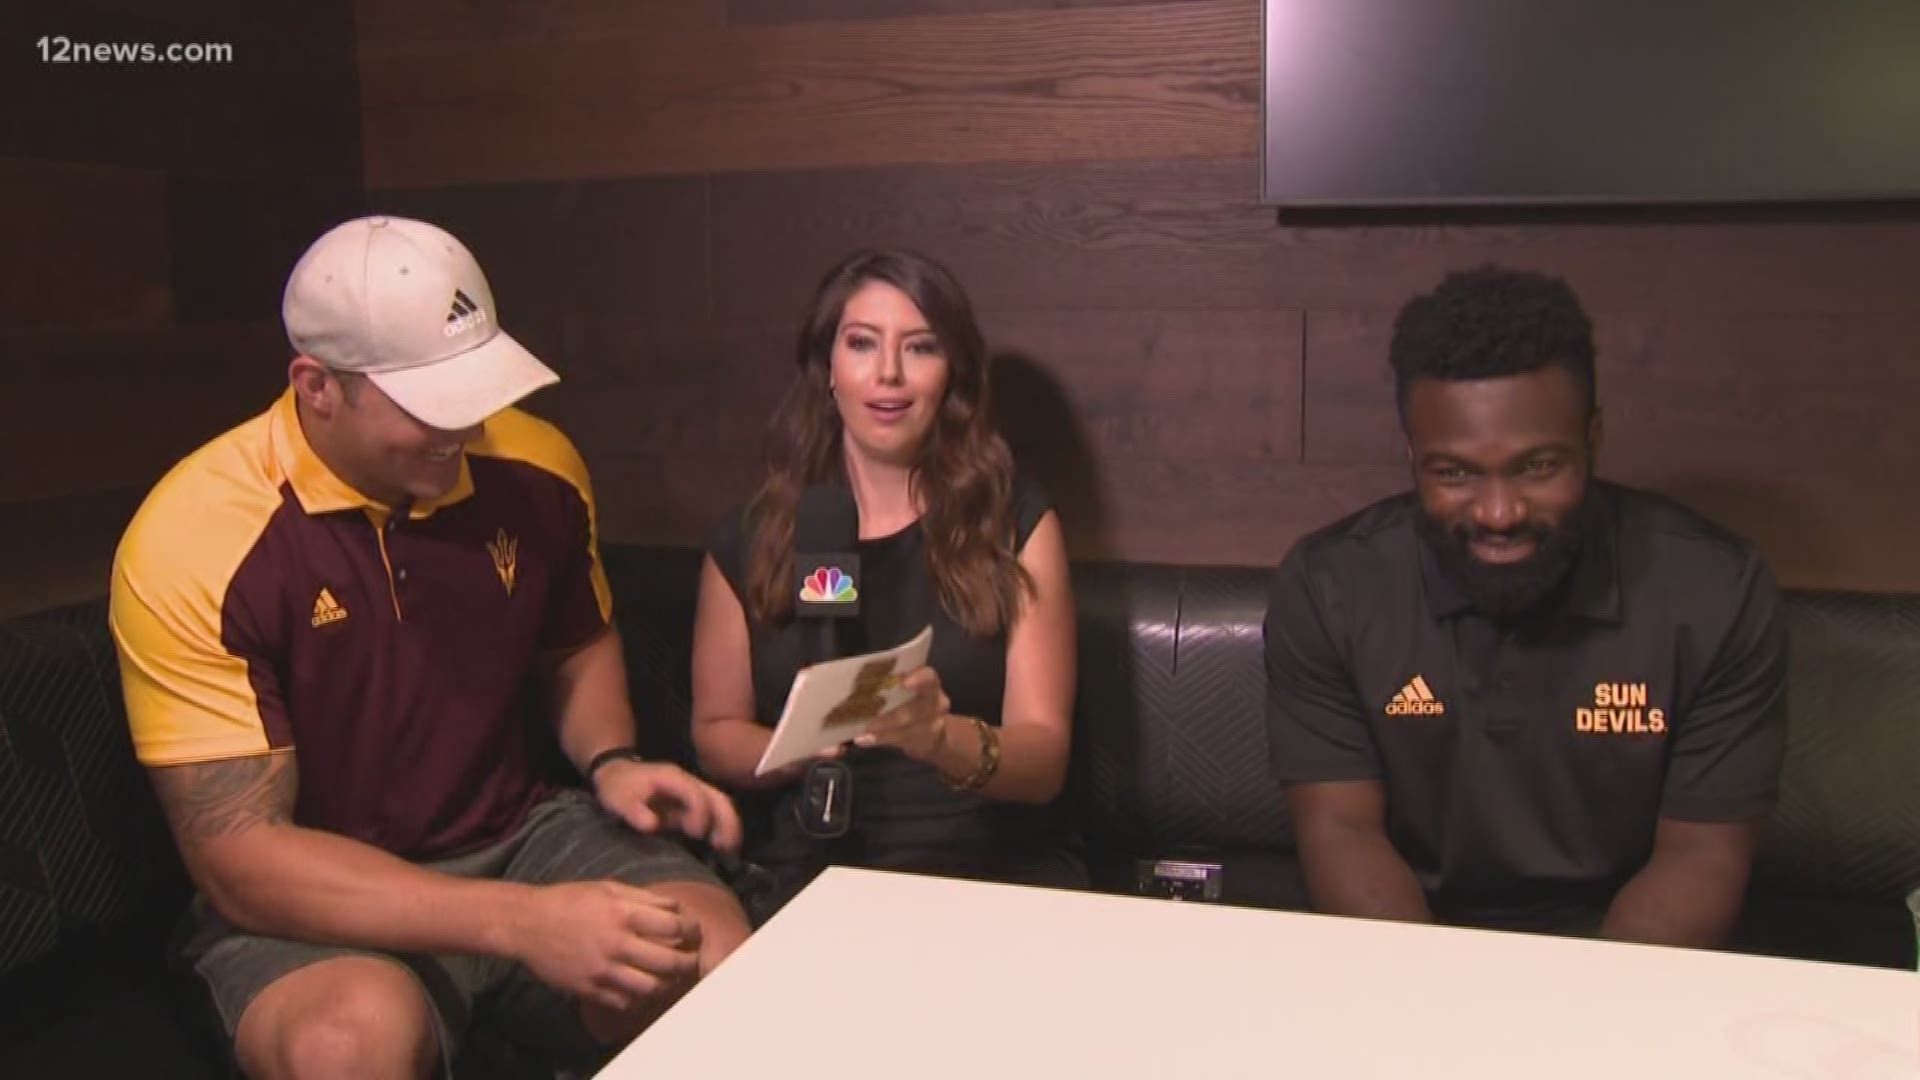 Ever heard of the game Fear the Phrase? It's a game that Ellen DeGeneres plays on her show with guests and our very own Chierstin Susel took the game to the Sun Devils to see if they had enough game to correctly guess some pretty difficult phrases.